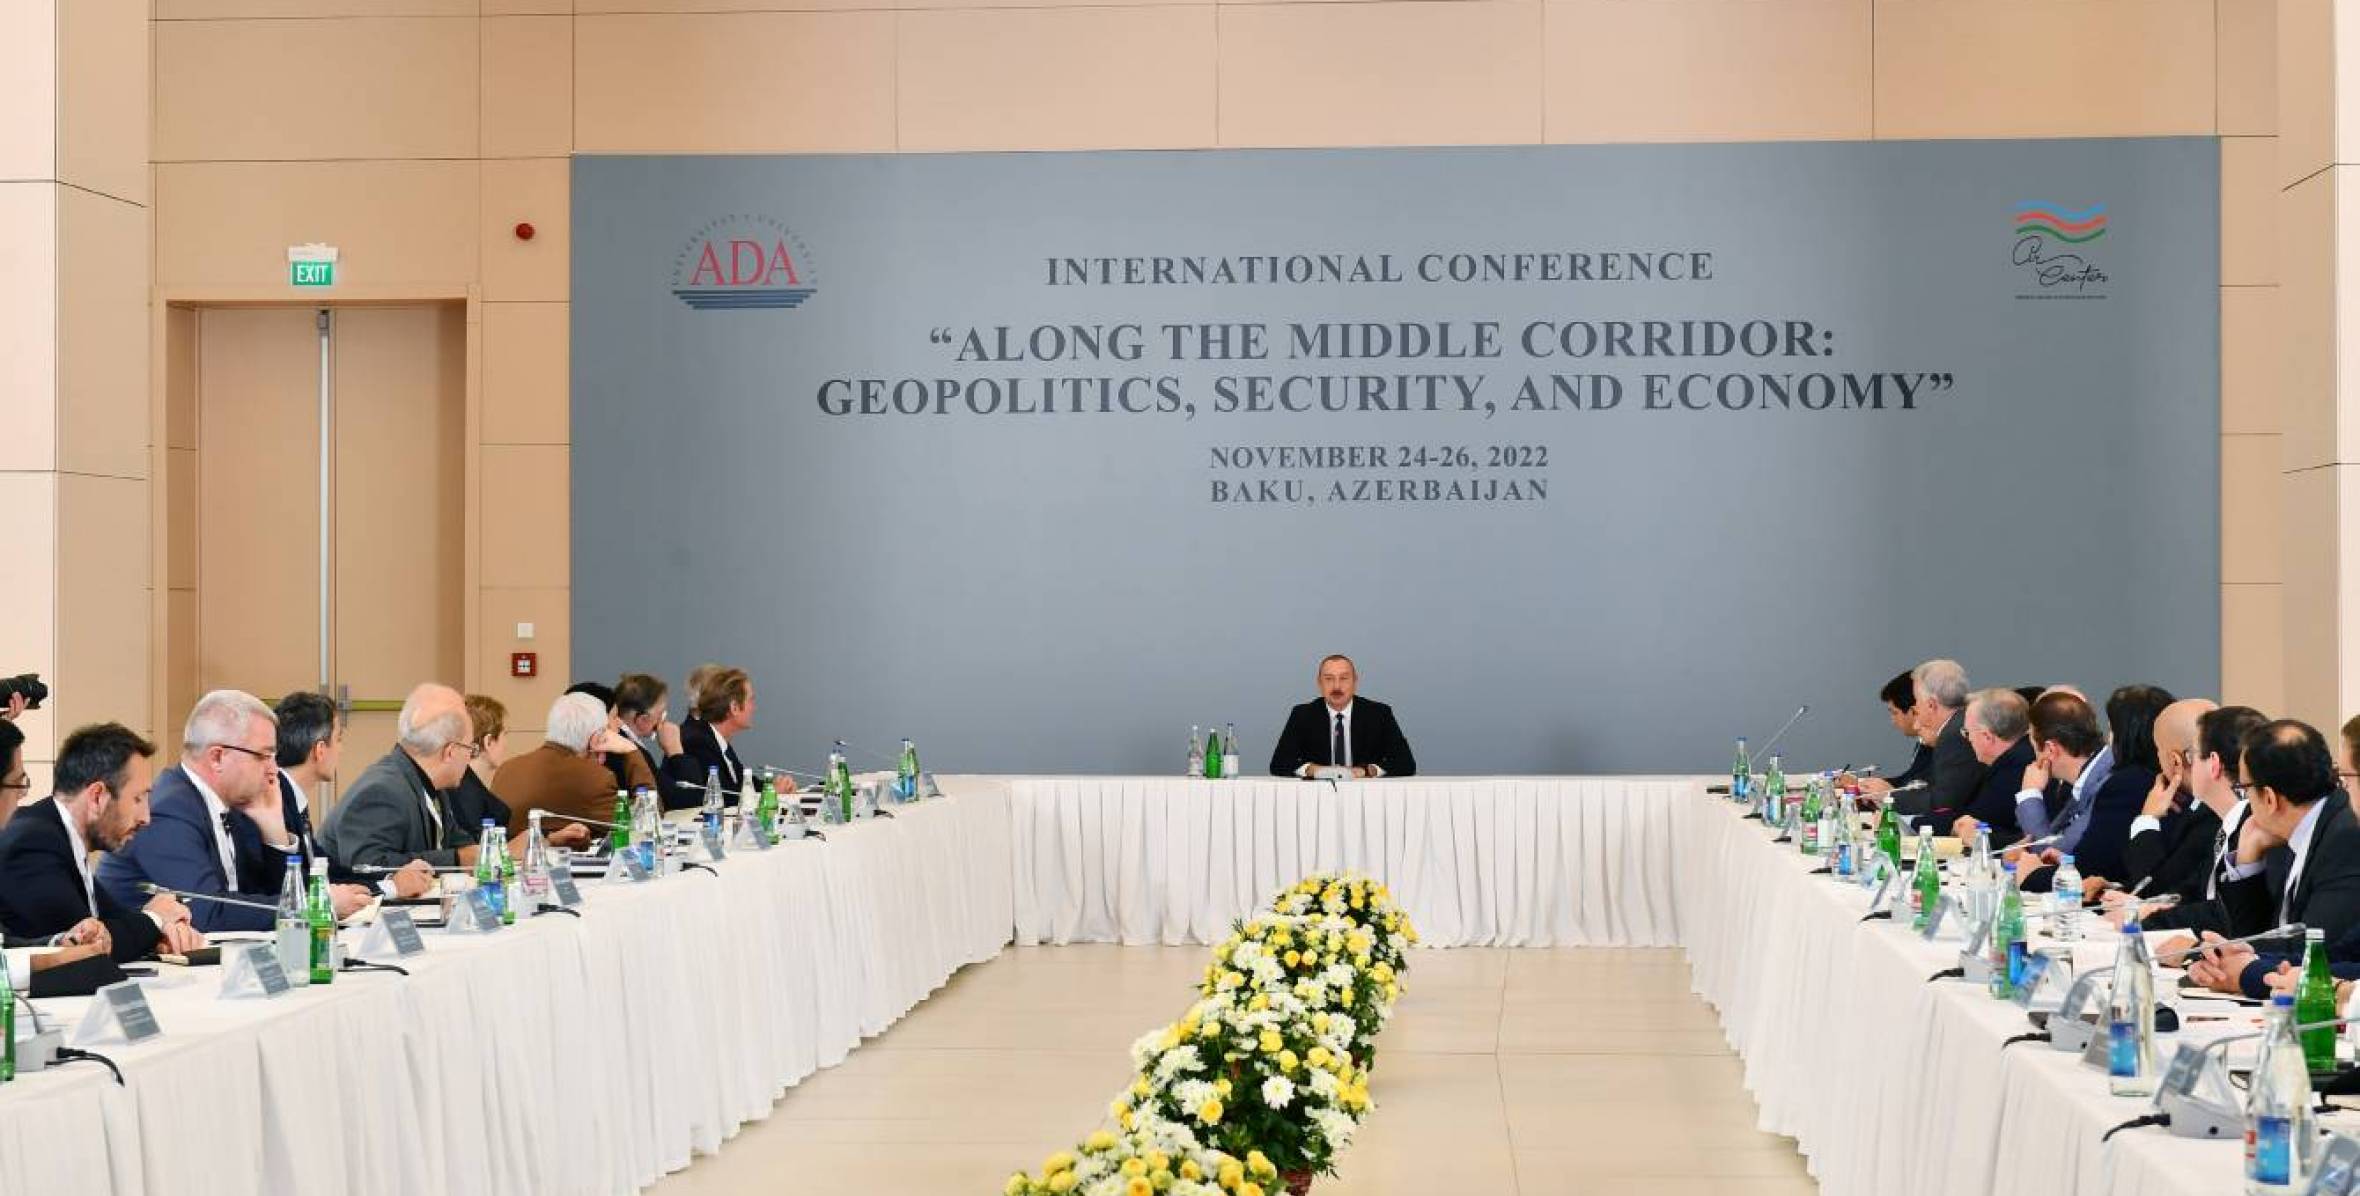 Speech by Ilham Aliyev at the opening of the conference under the motto “Along the Middle Corridor: Geopolitics, Security and Economy”